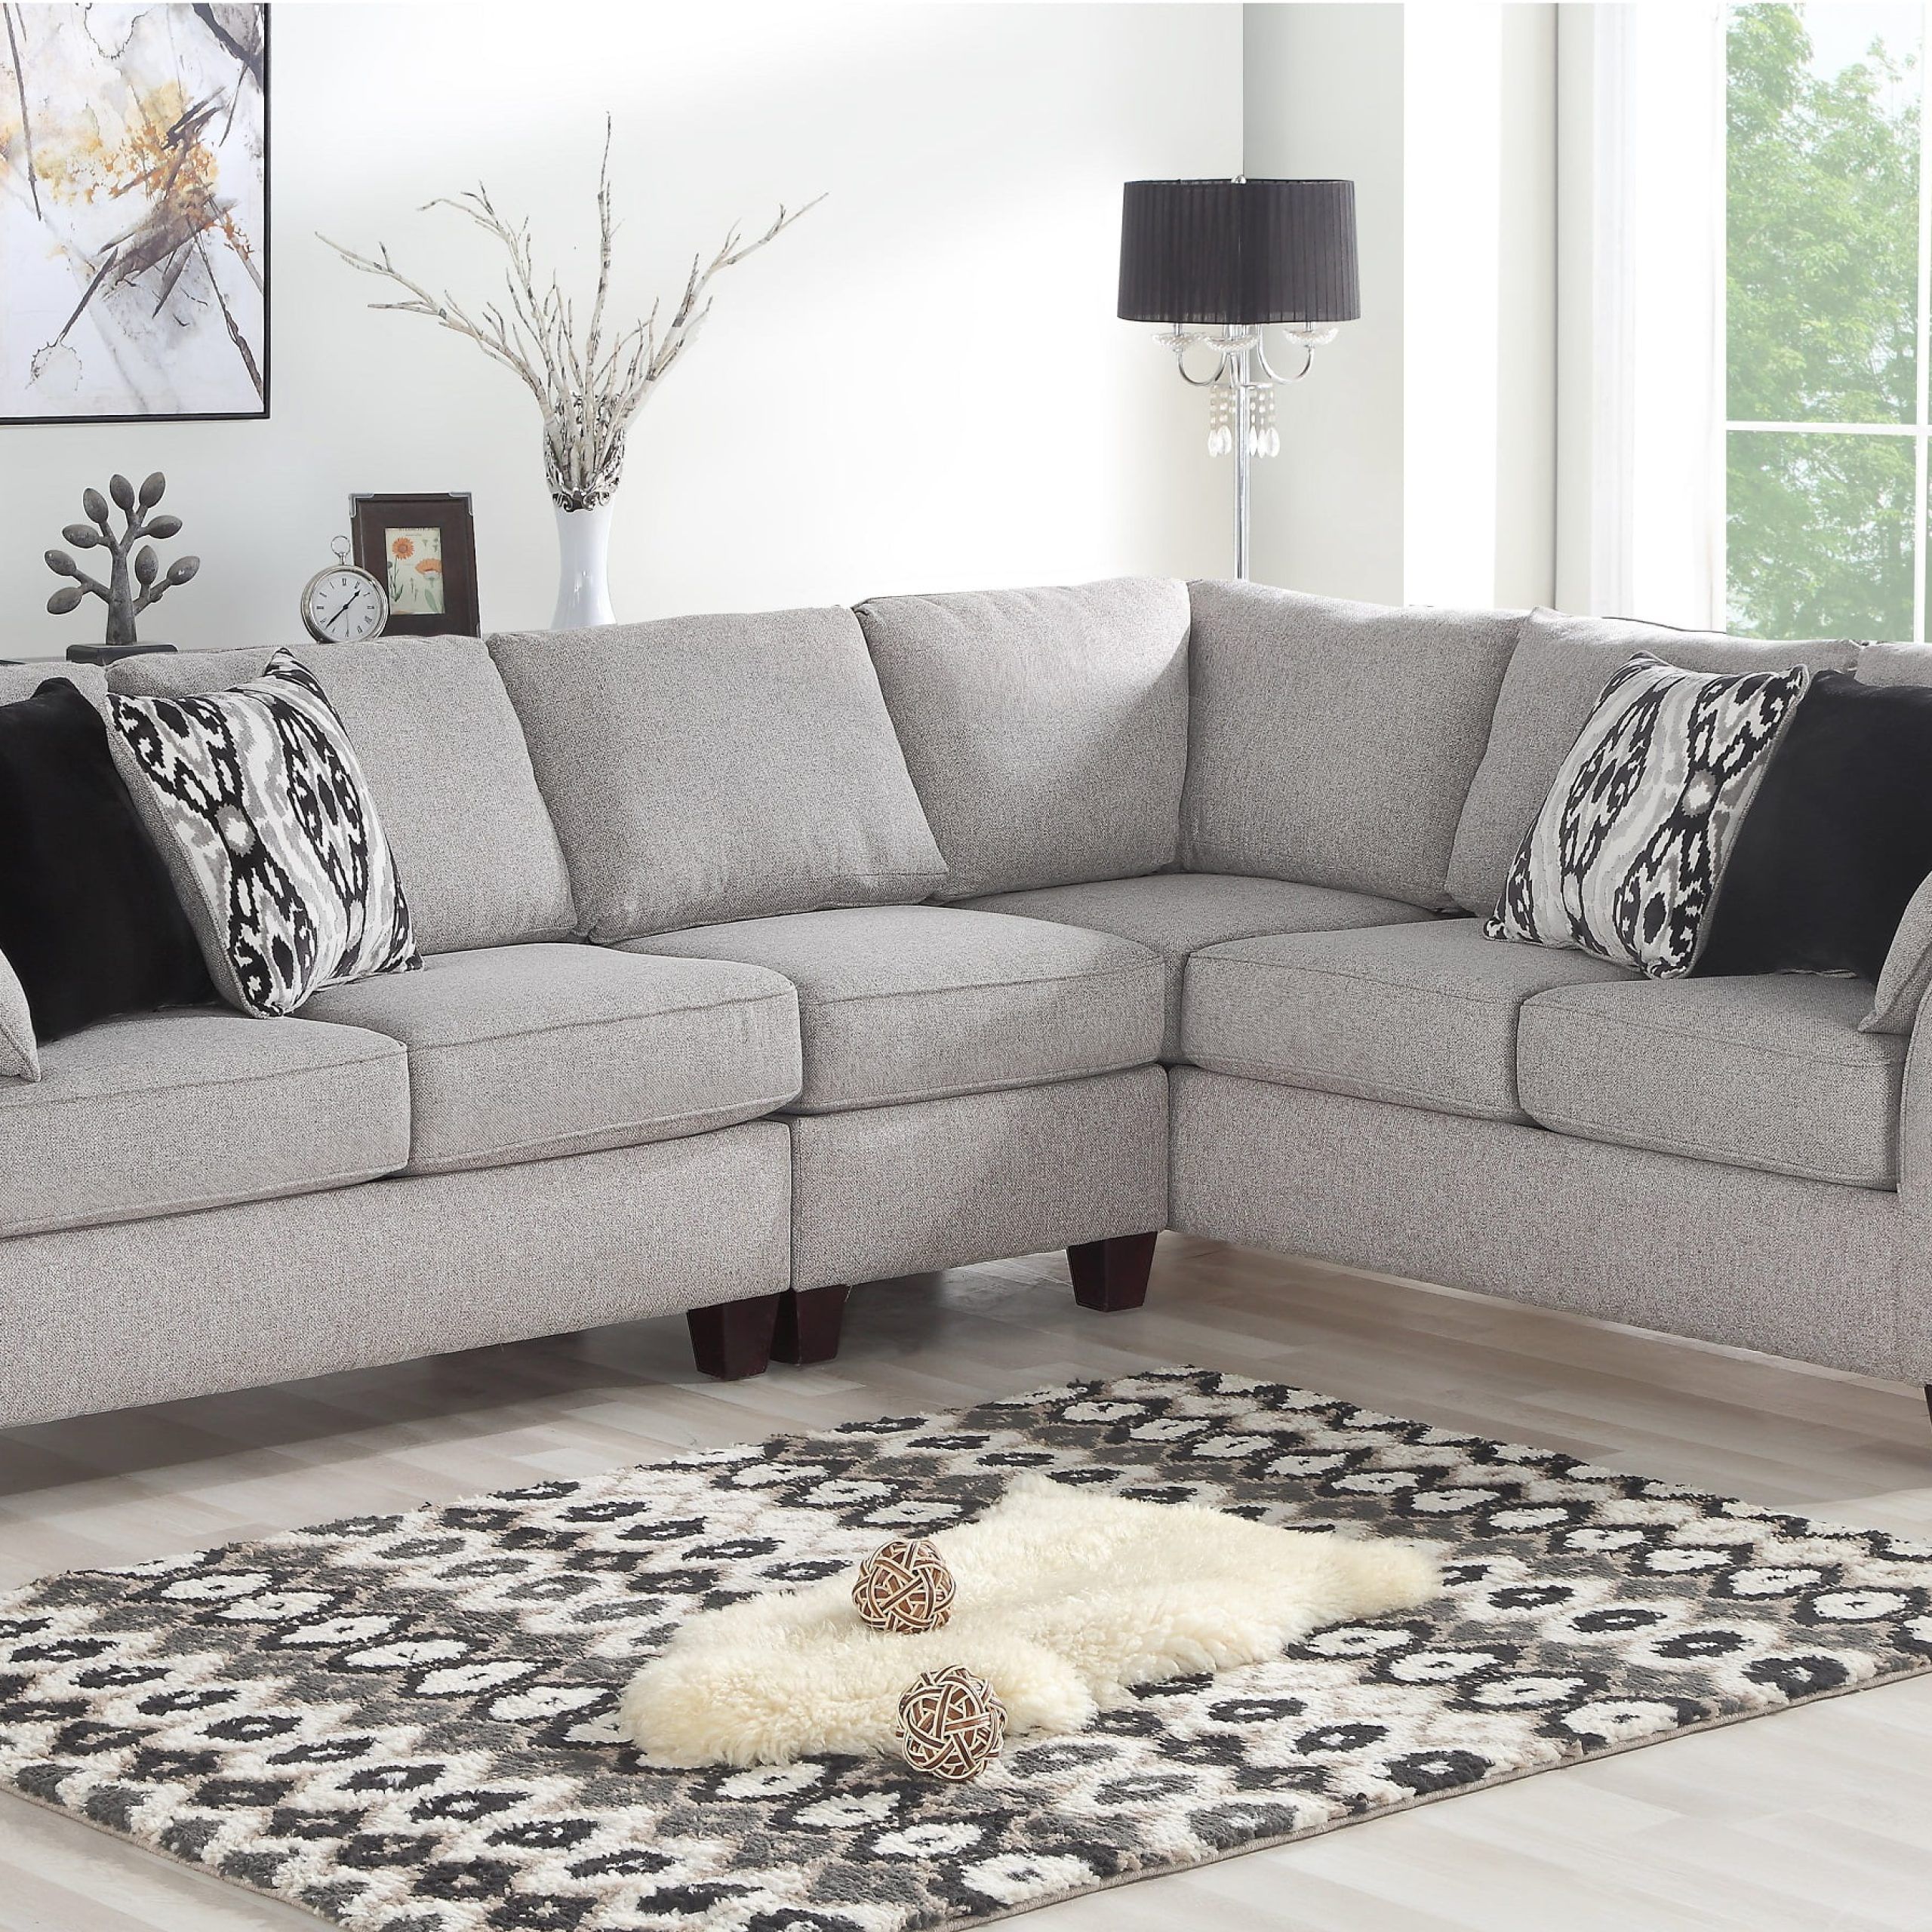 Well Liked Living Room Furniture Beautiful Look Family Seating 3pc Sectional Sofa Pertaining To Sofas For Living Rooms (View 11 of 15)